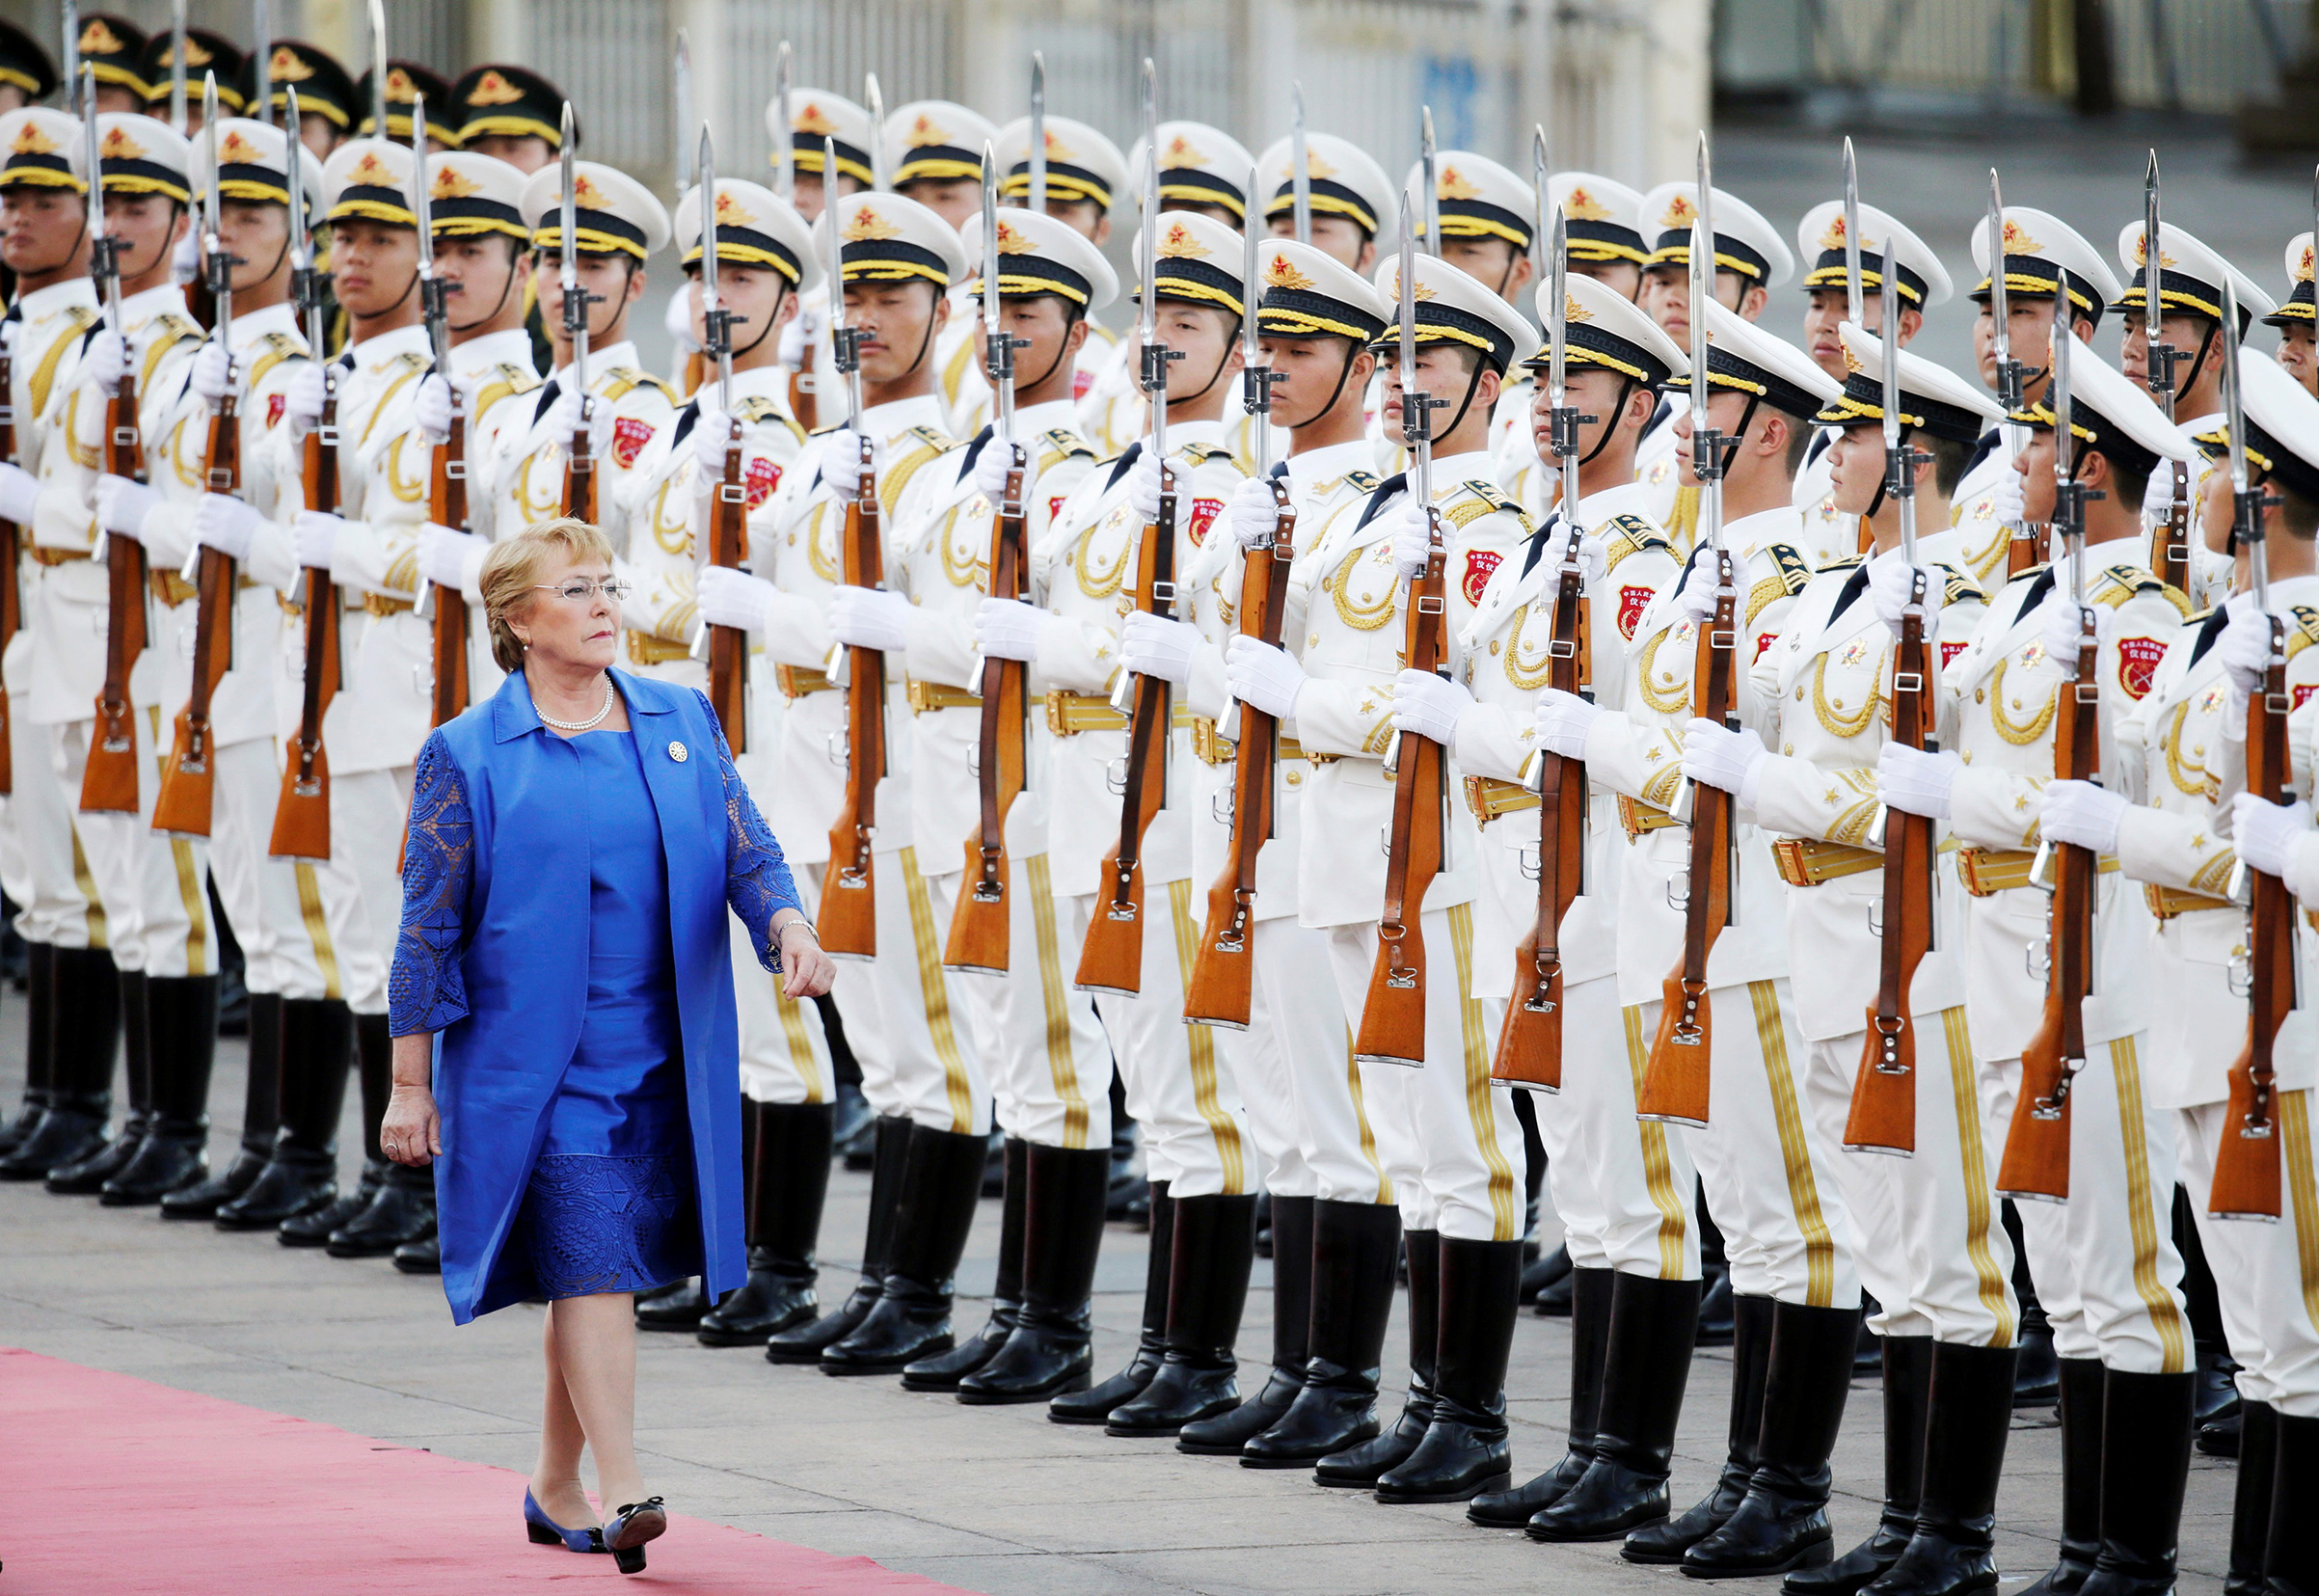 Chilean President Michelle Bachelet reviews the honour guard at a welcoming ceremony ahead of the Belt and Road Forum in Beijing, China May 13, 2017. (Jason Lee—Reuters)